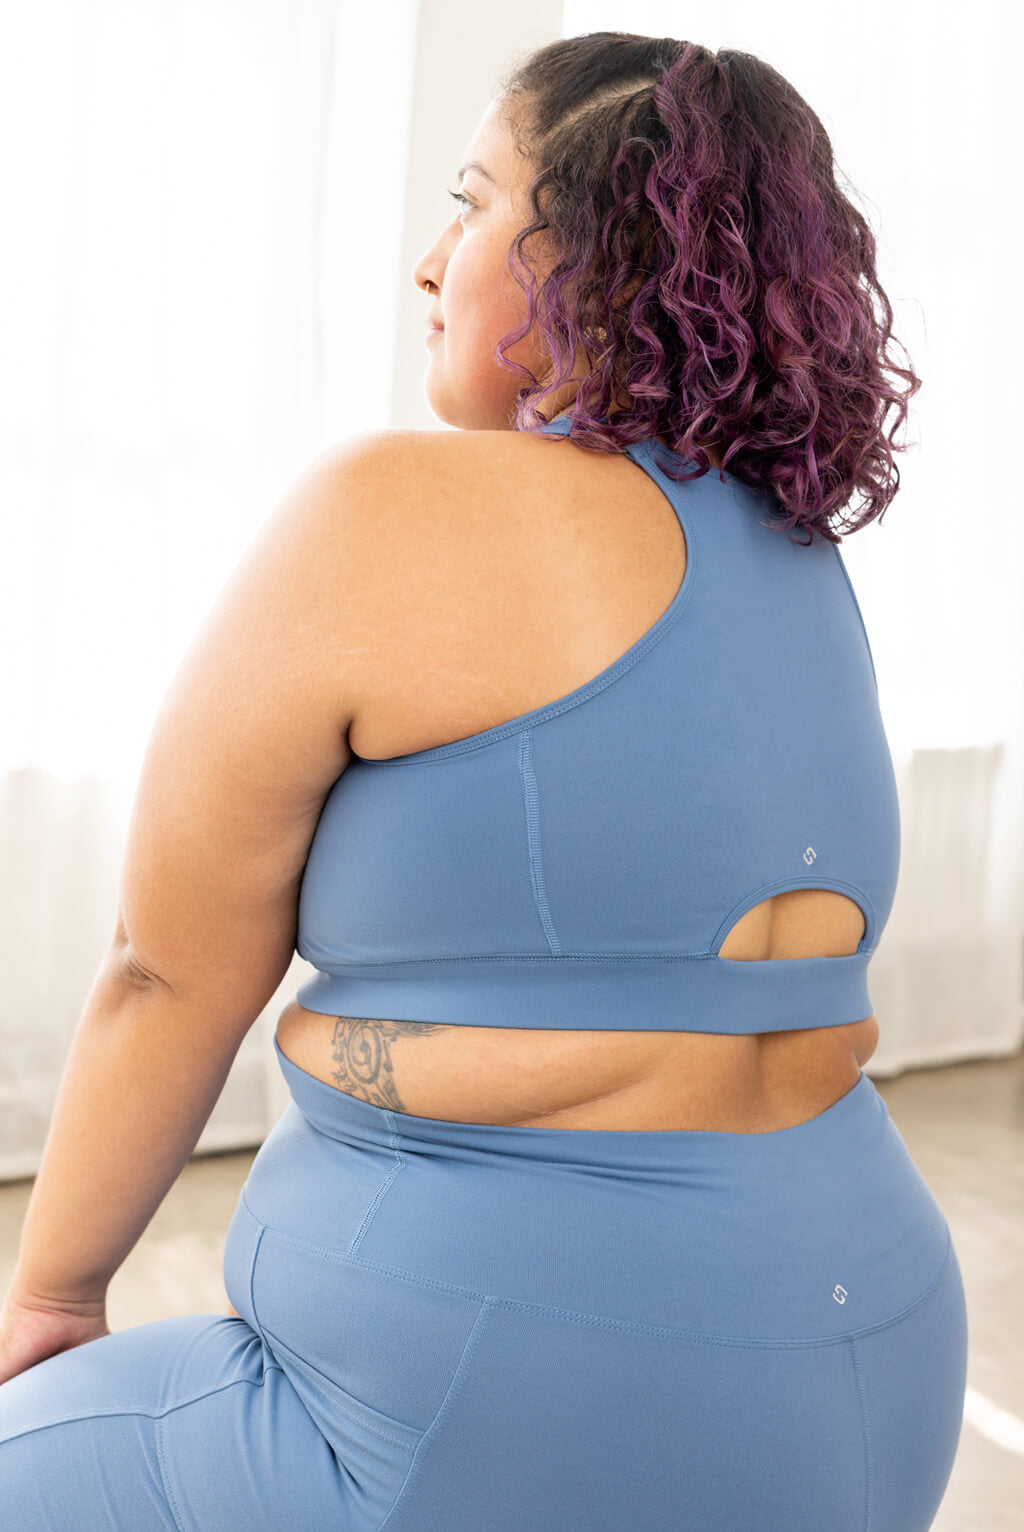 plus size sports bra with a zipper closing front in moonlight blue, back